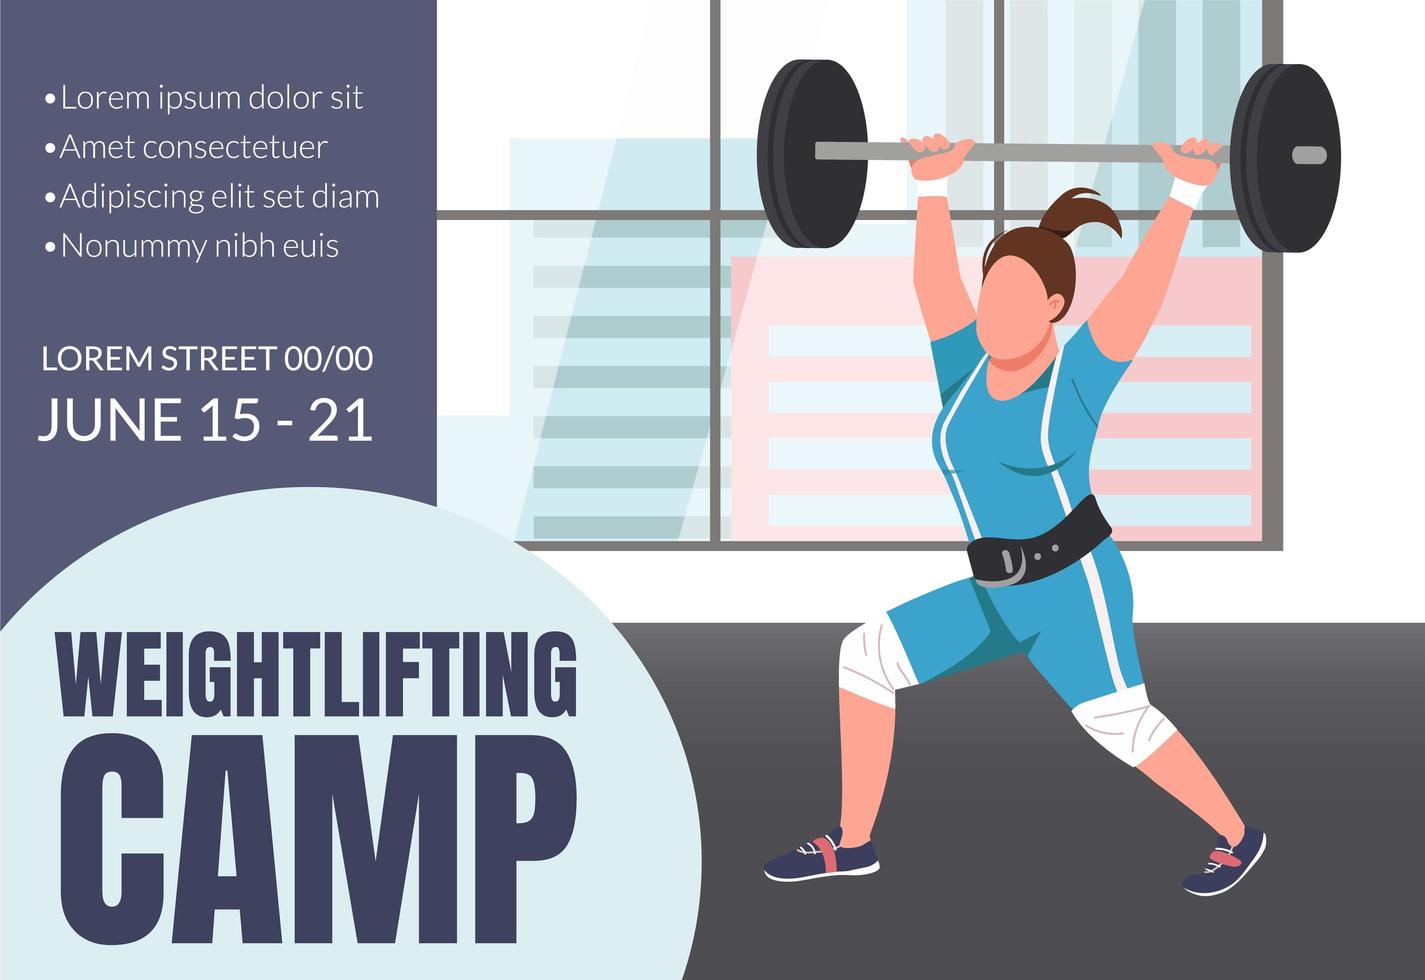 Weightlifting camp banner vector